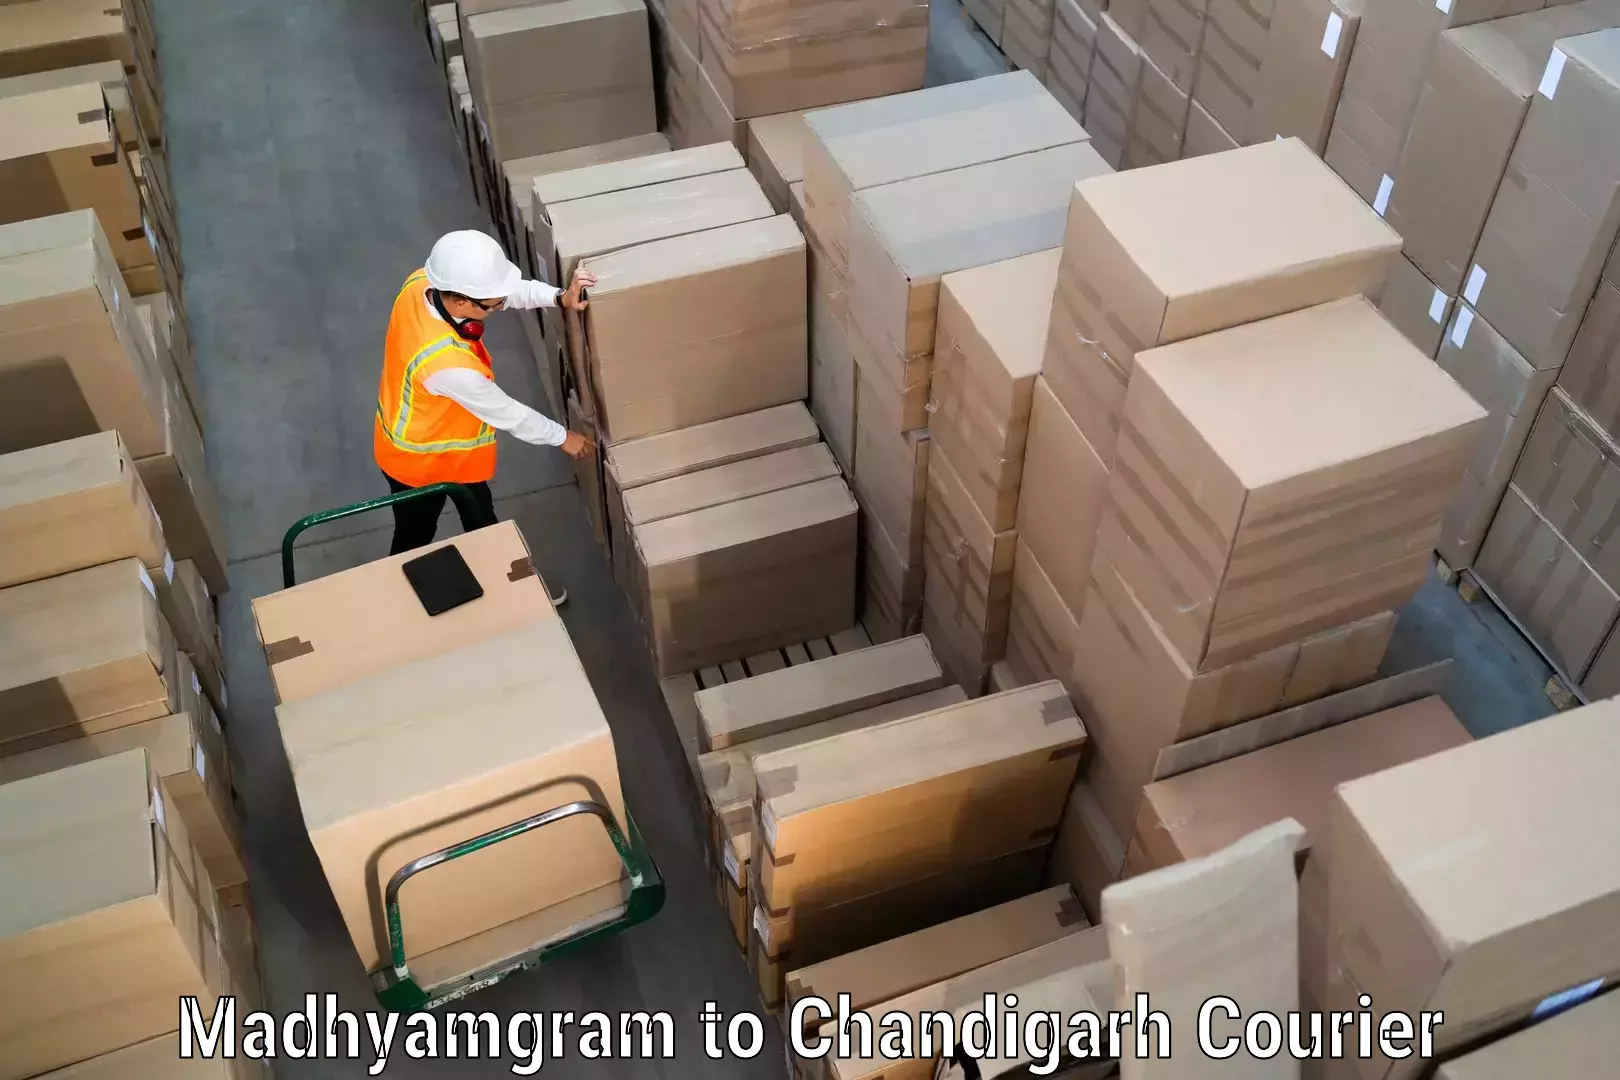 Global freight services Madhyamgram to Chandigarh